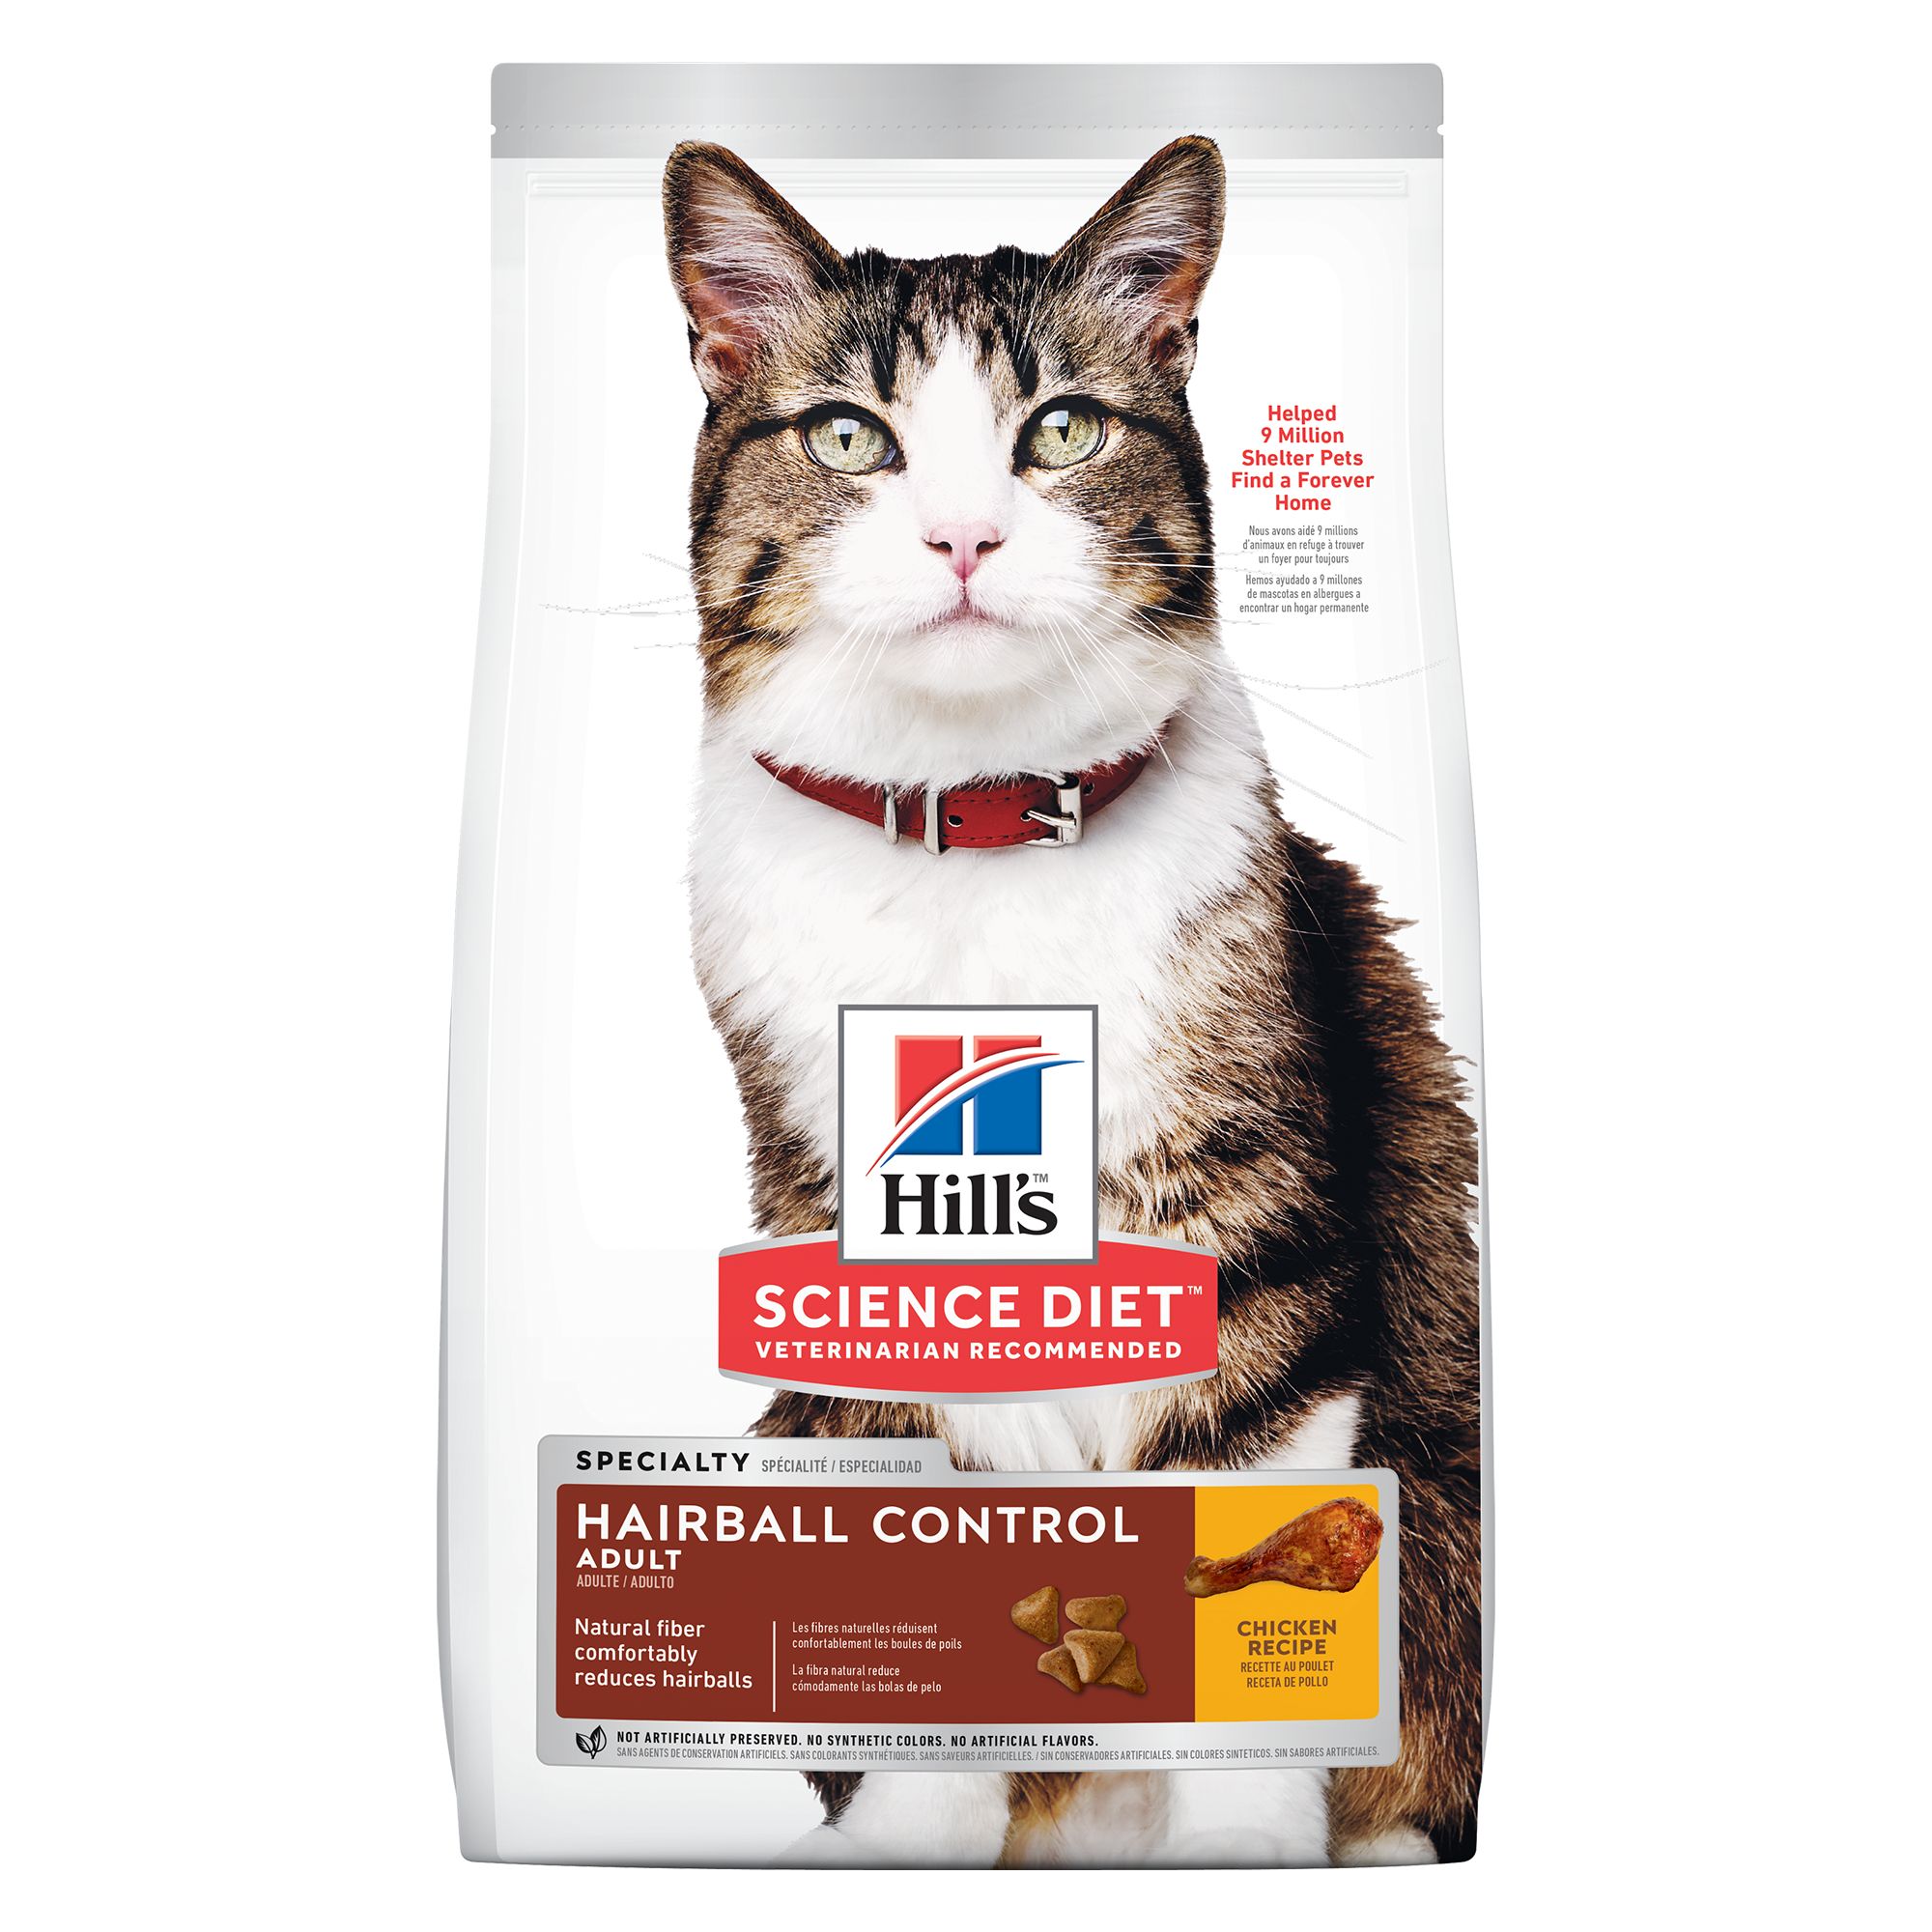 Hairball Control Adult Cat Food 